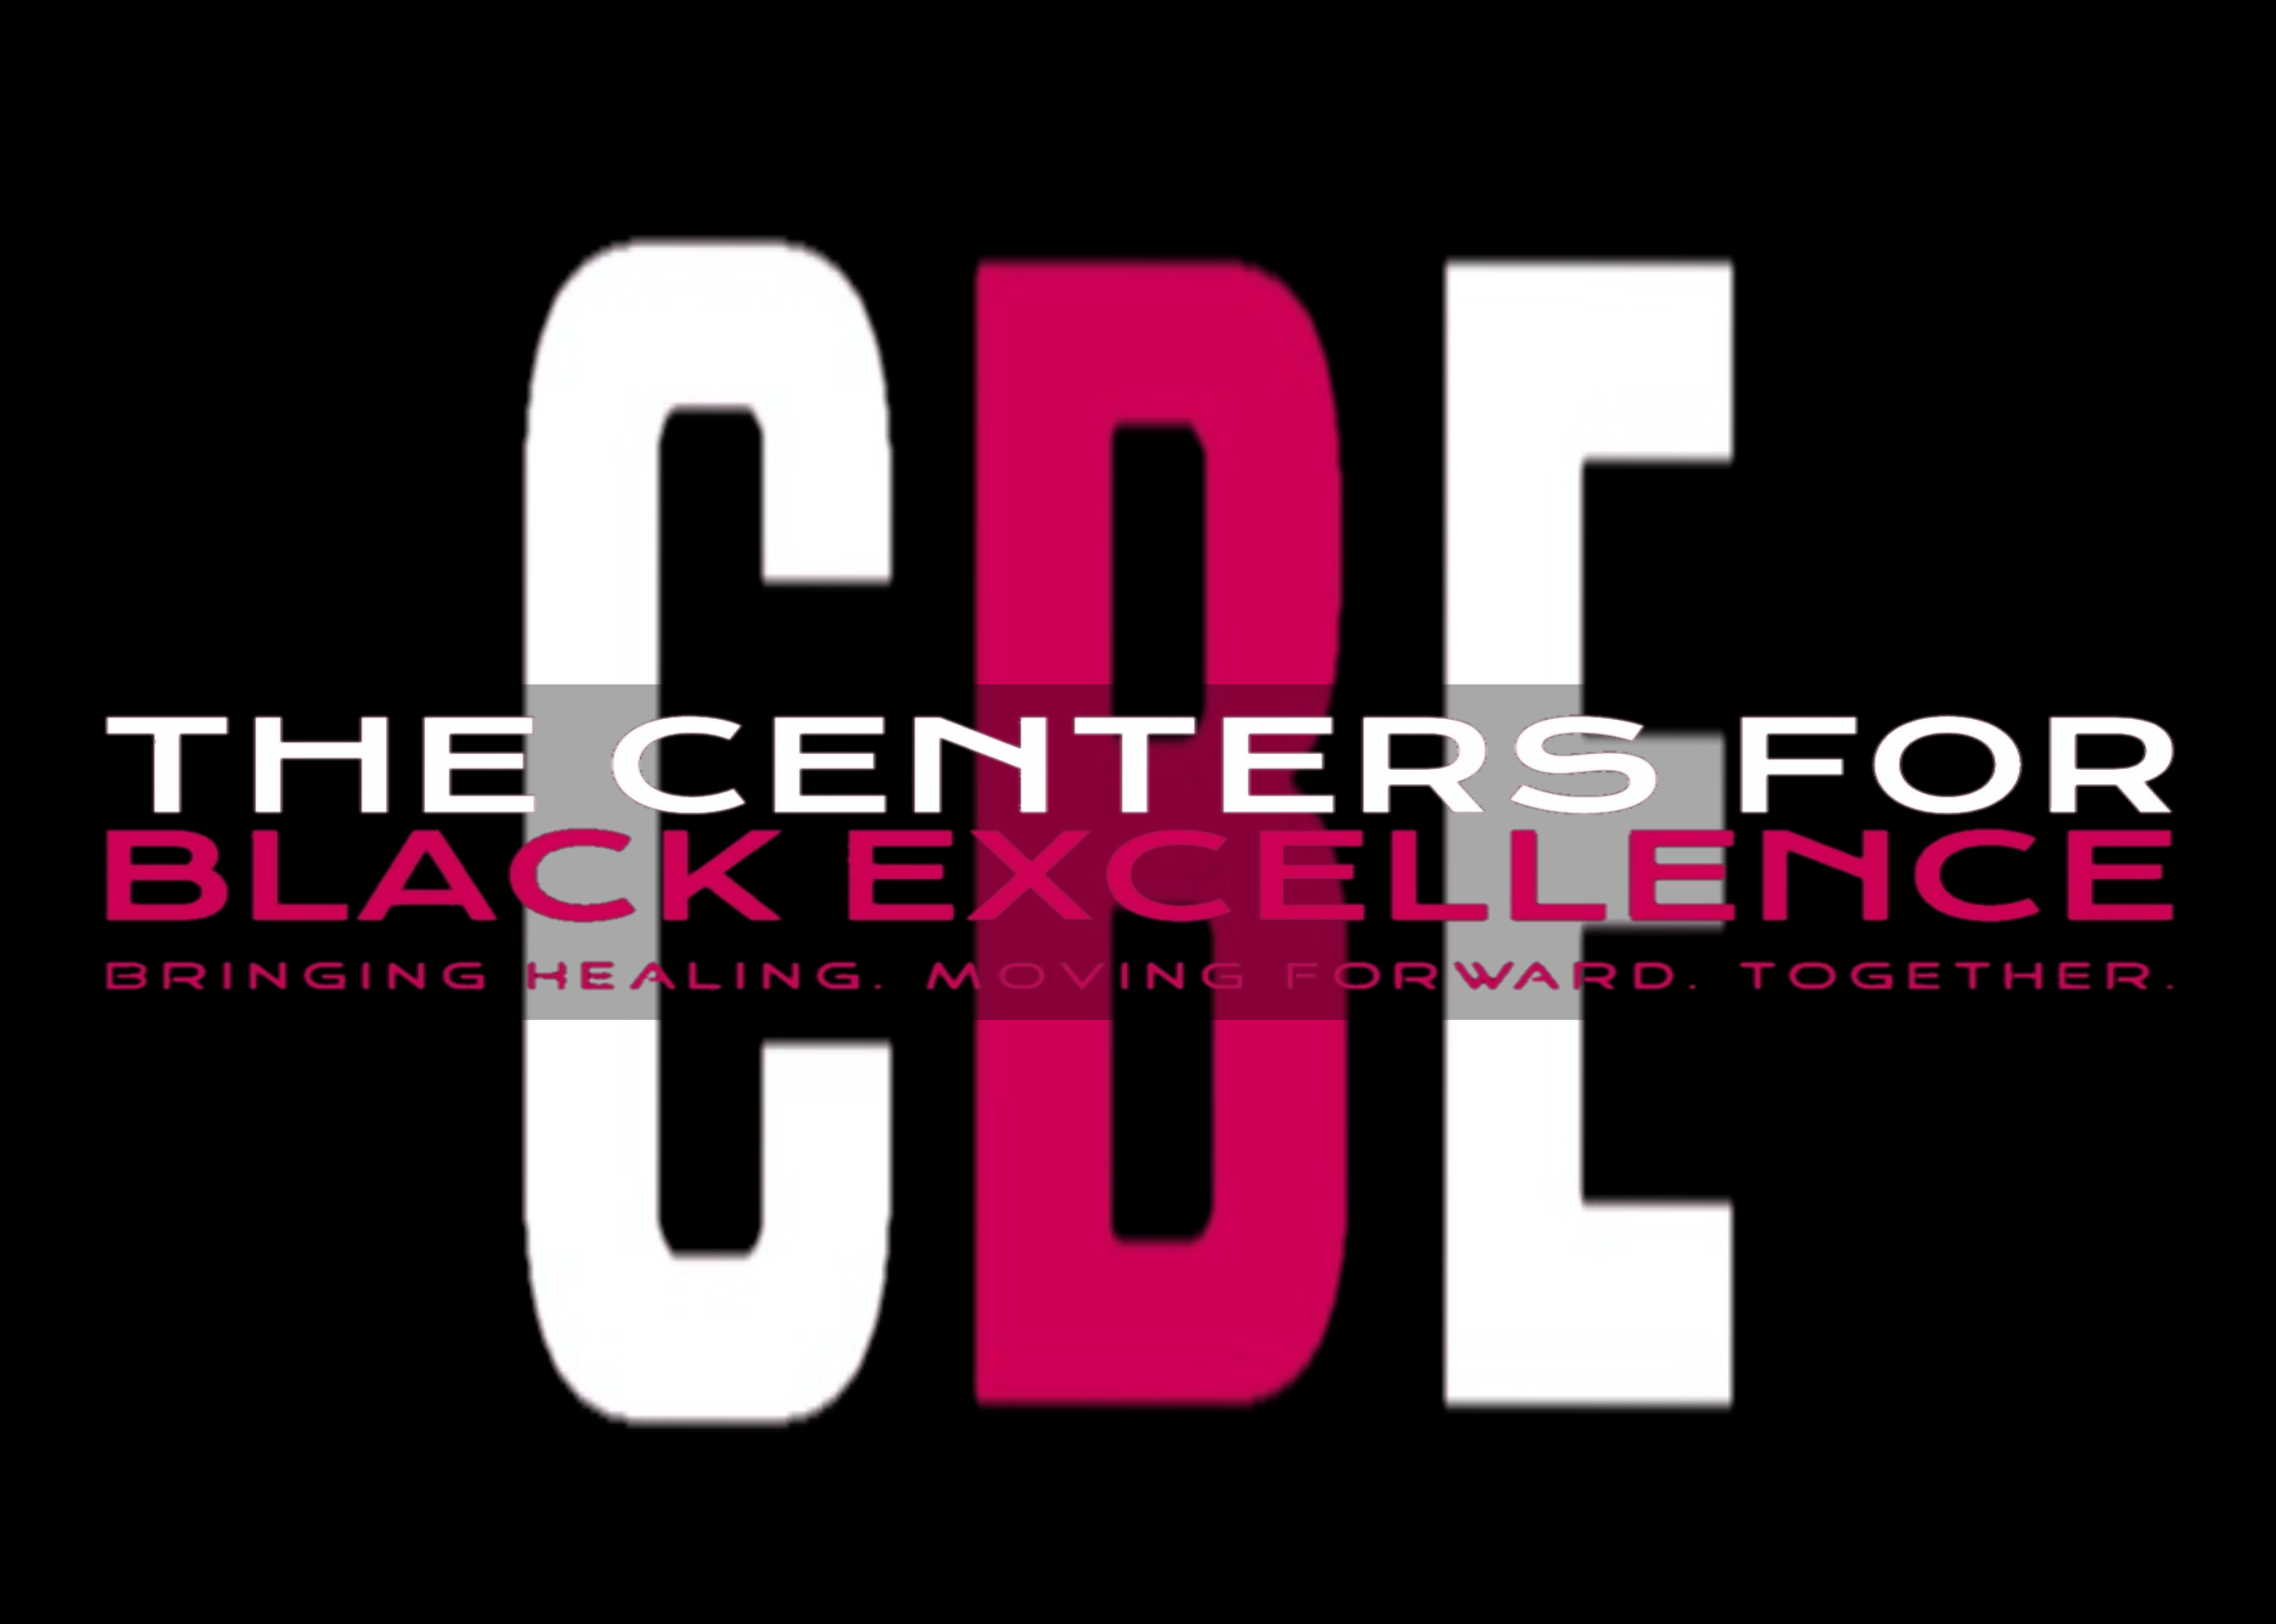 The Centers for Black Excellence logo